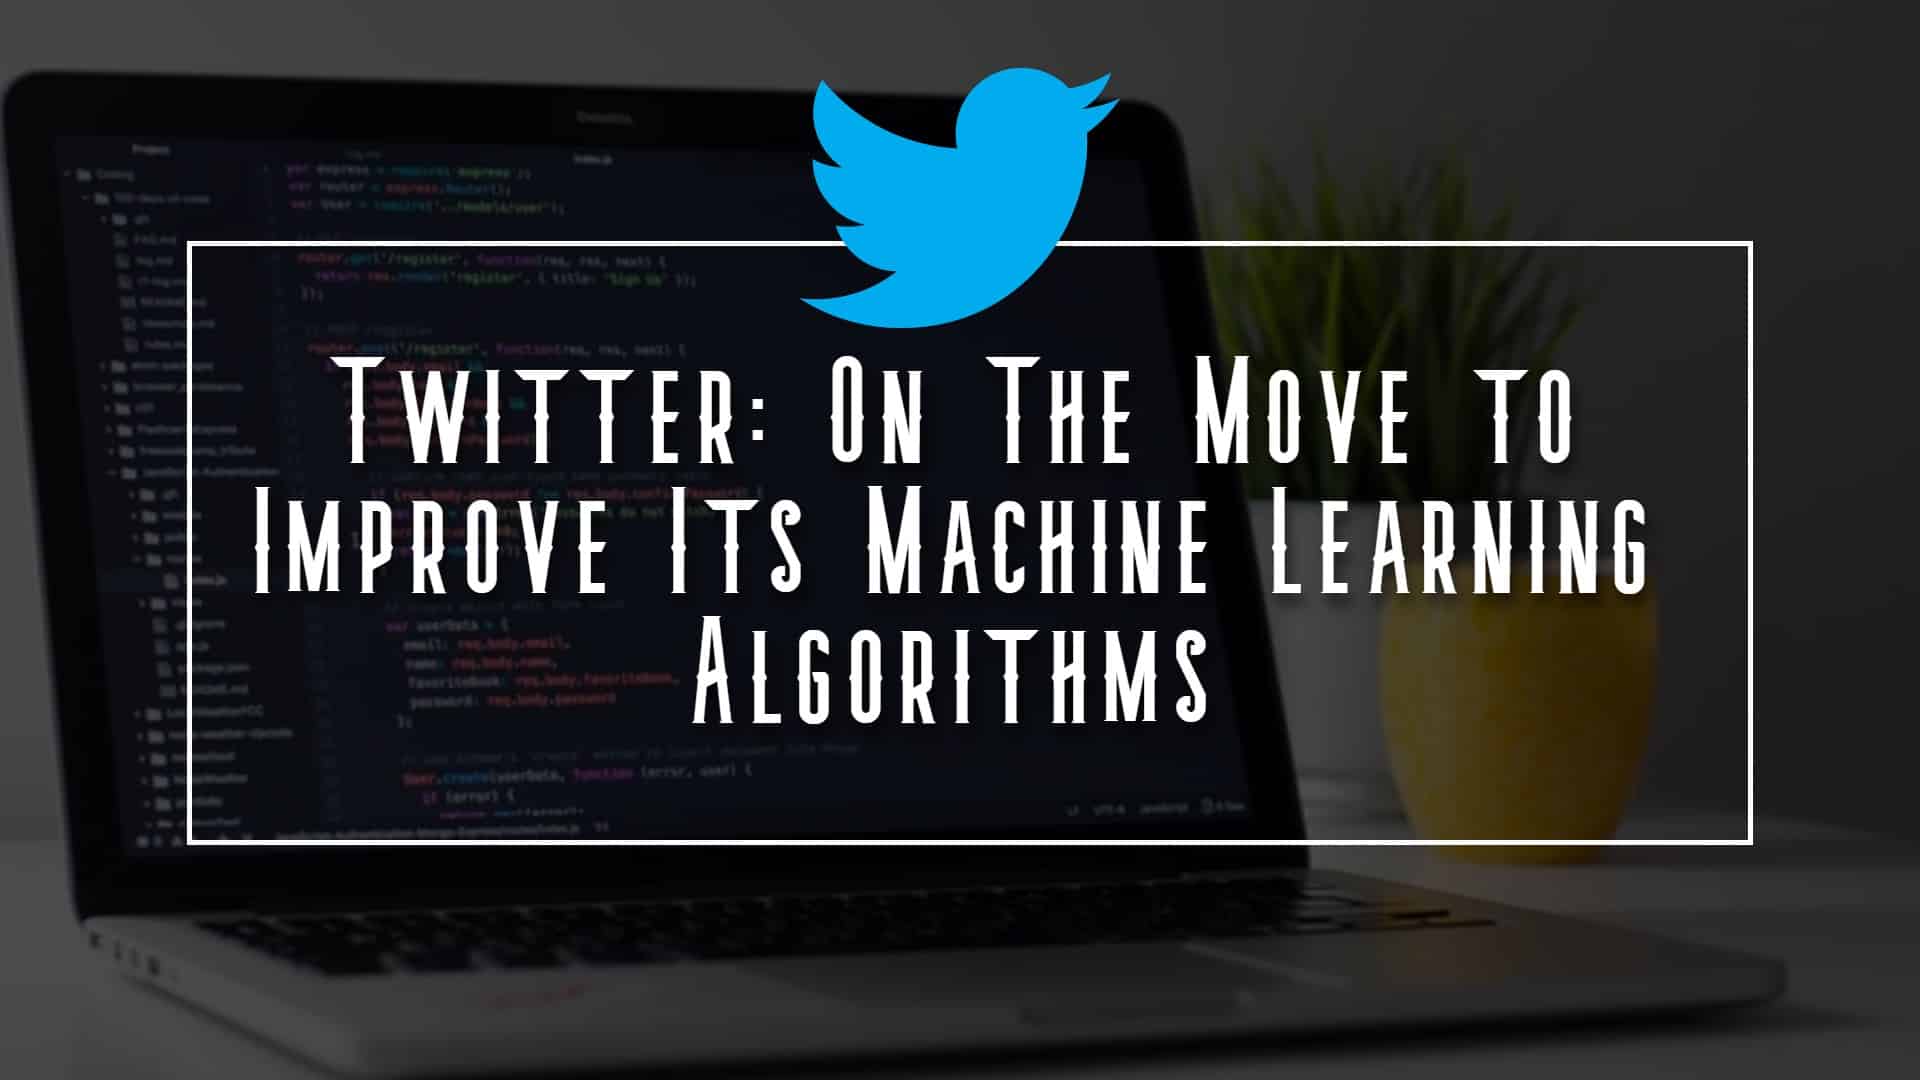 Twitter: On the Move to Improve Its Machine Learning Algorithms